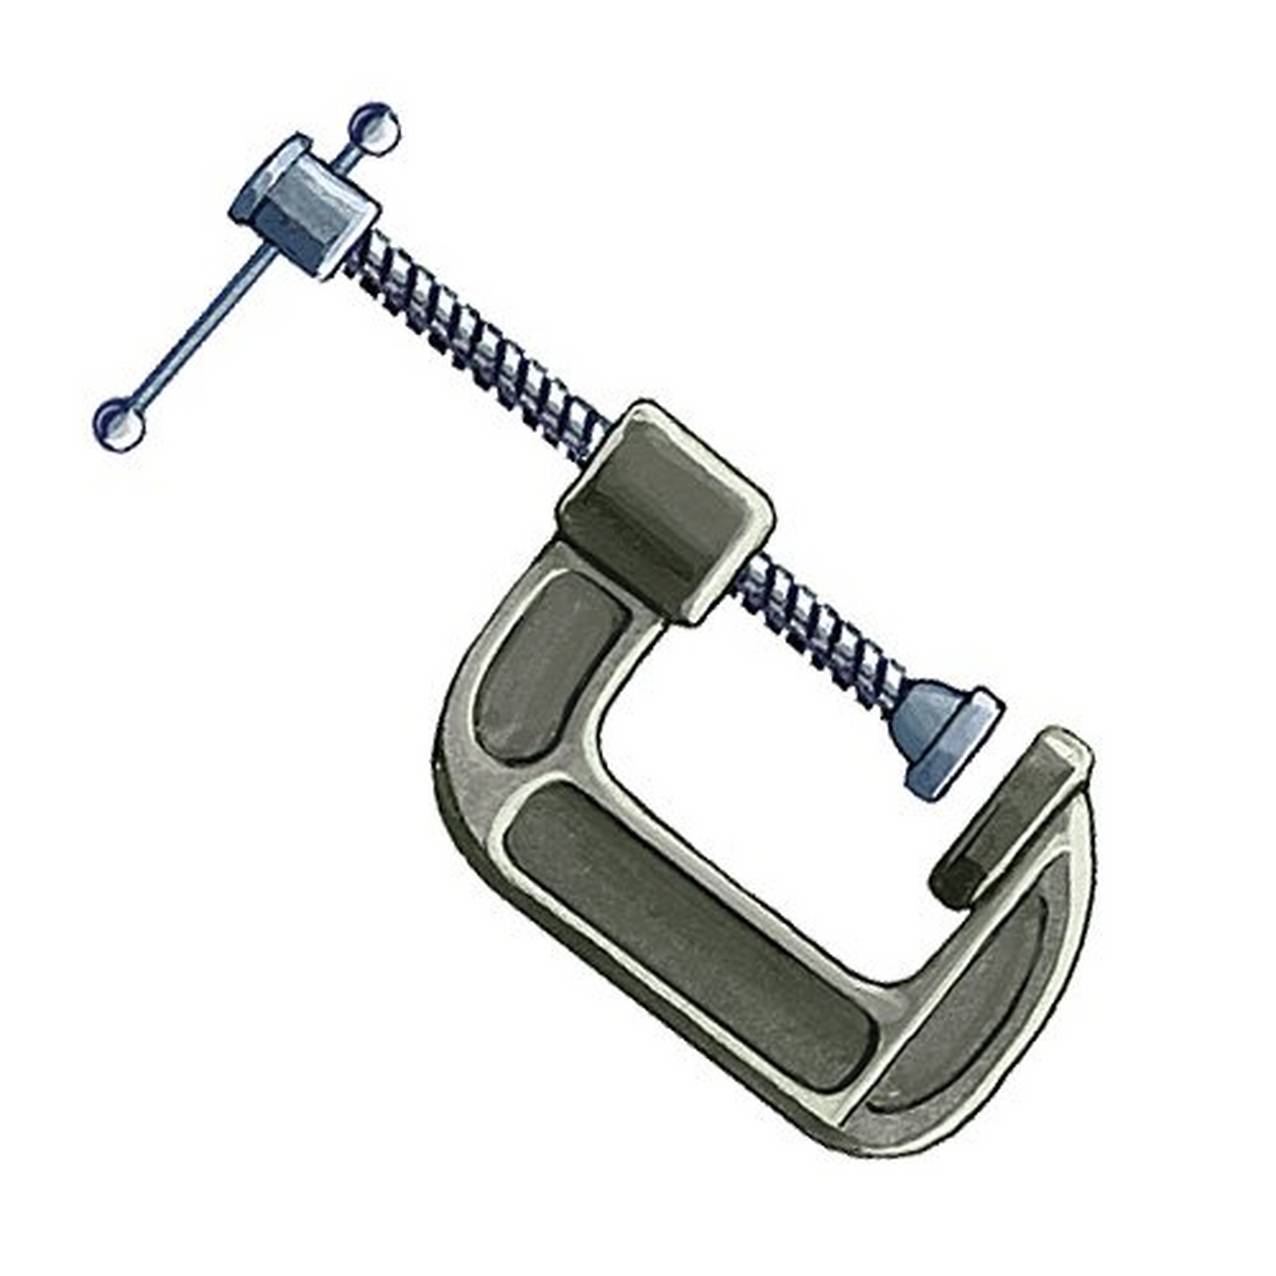 icon of a vice or clamp